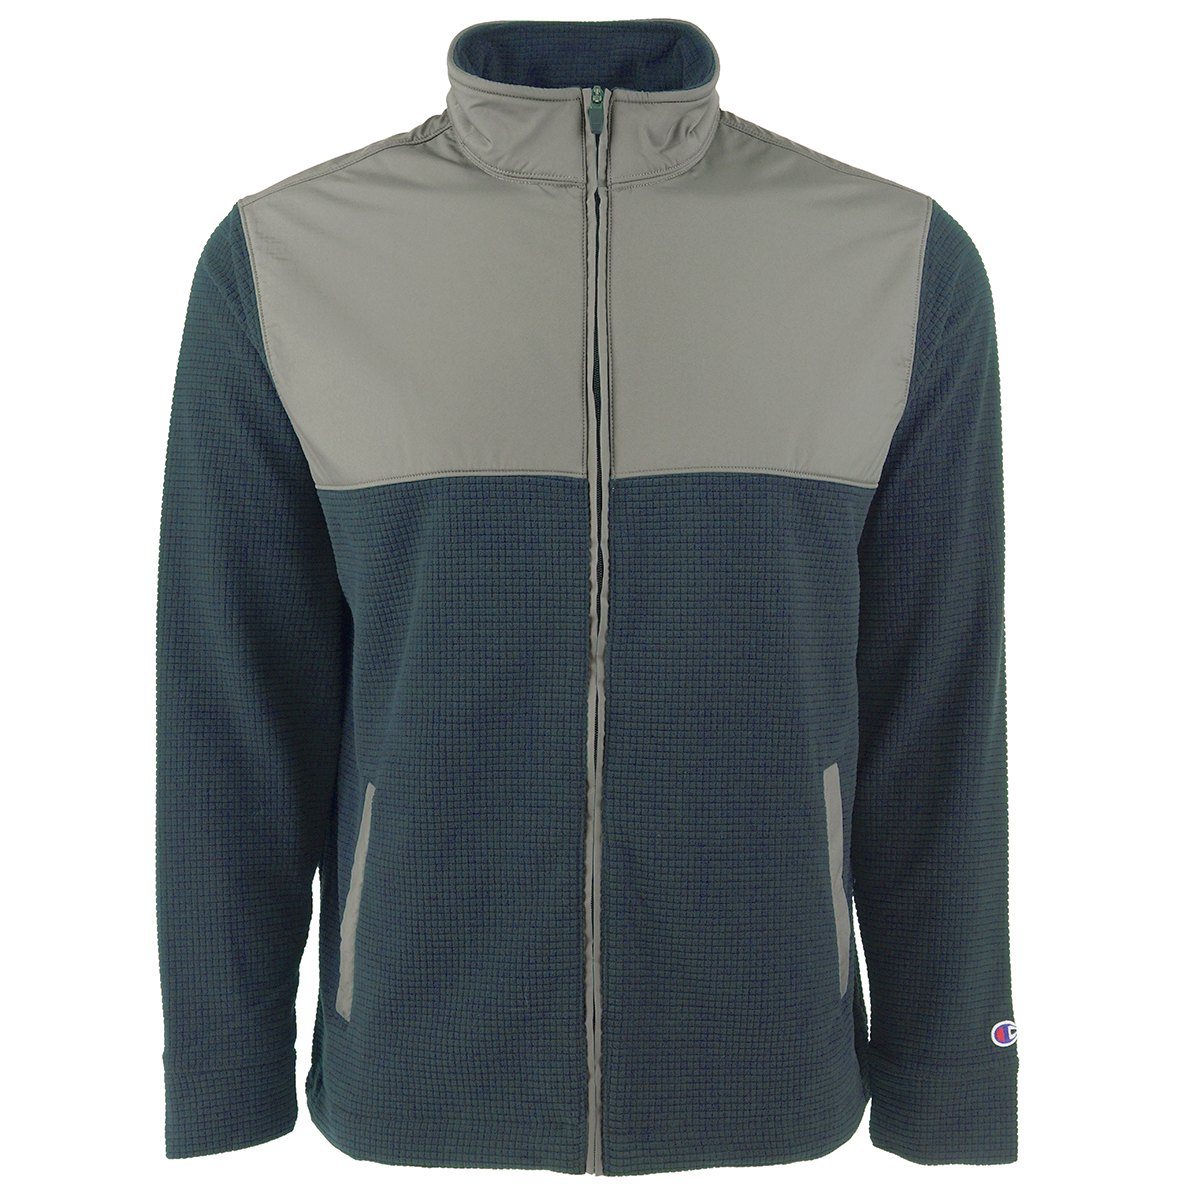 Price drop! Champion men’s fleece athletic jacket for $8, free shipping